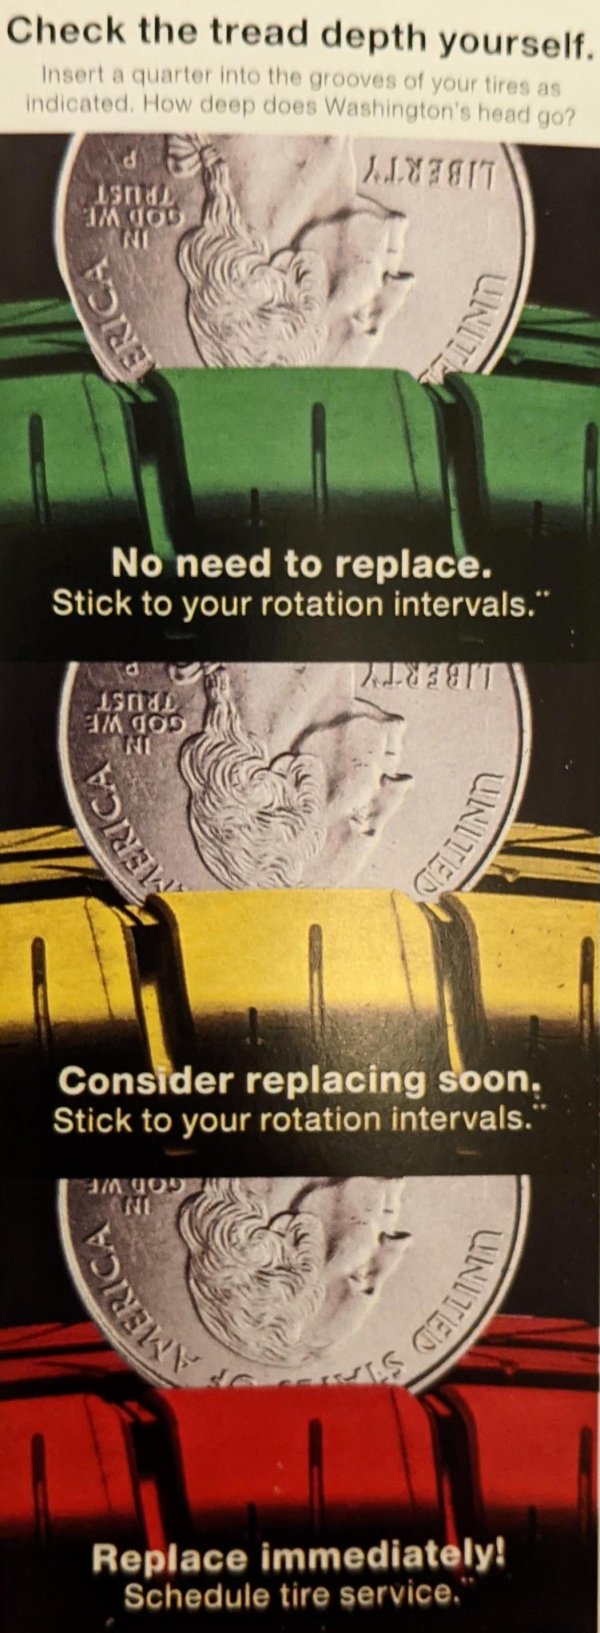 poster - Check the tread depth yourself. Insert a quarter into the grooves of your tires as indicated. How deep does Washington's head go? L.Lxzot Isi Im God Ni Erica Ulin No need to replace. Stick to your rotation intervals." Puti Isol 11 Ios Ne Merica U